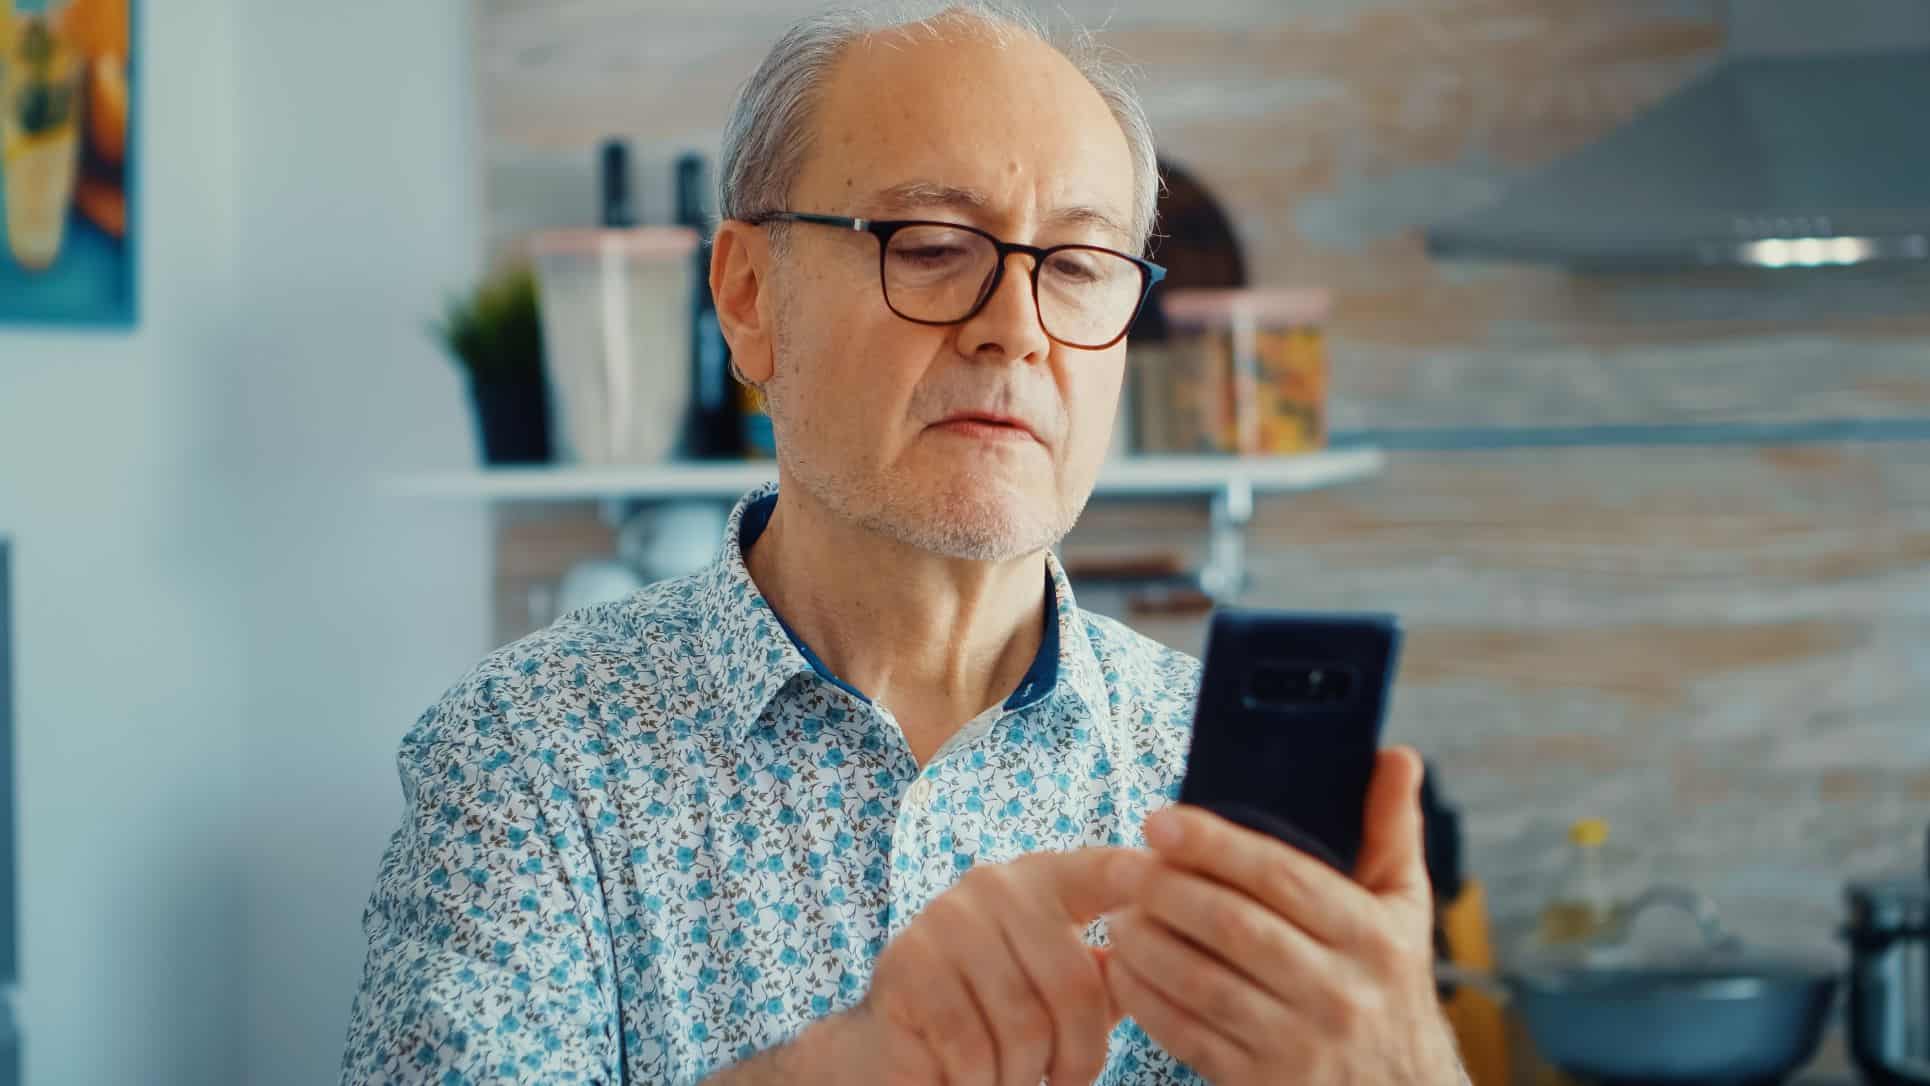 Man using Android phone